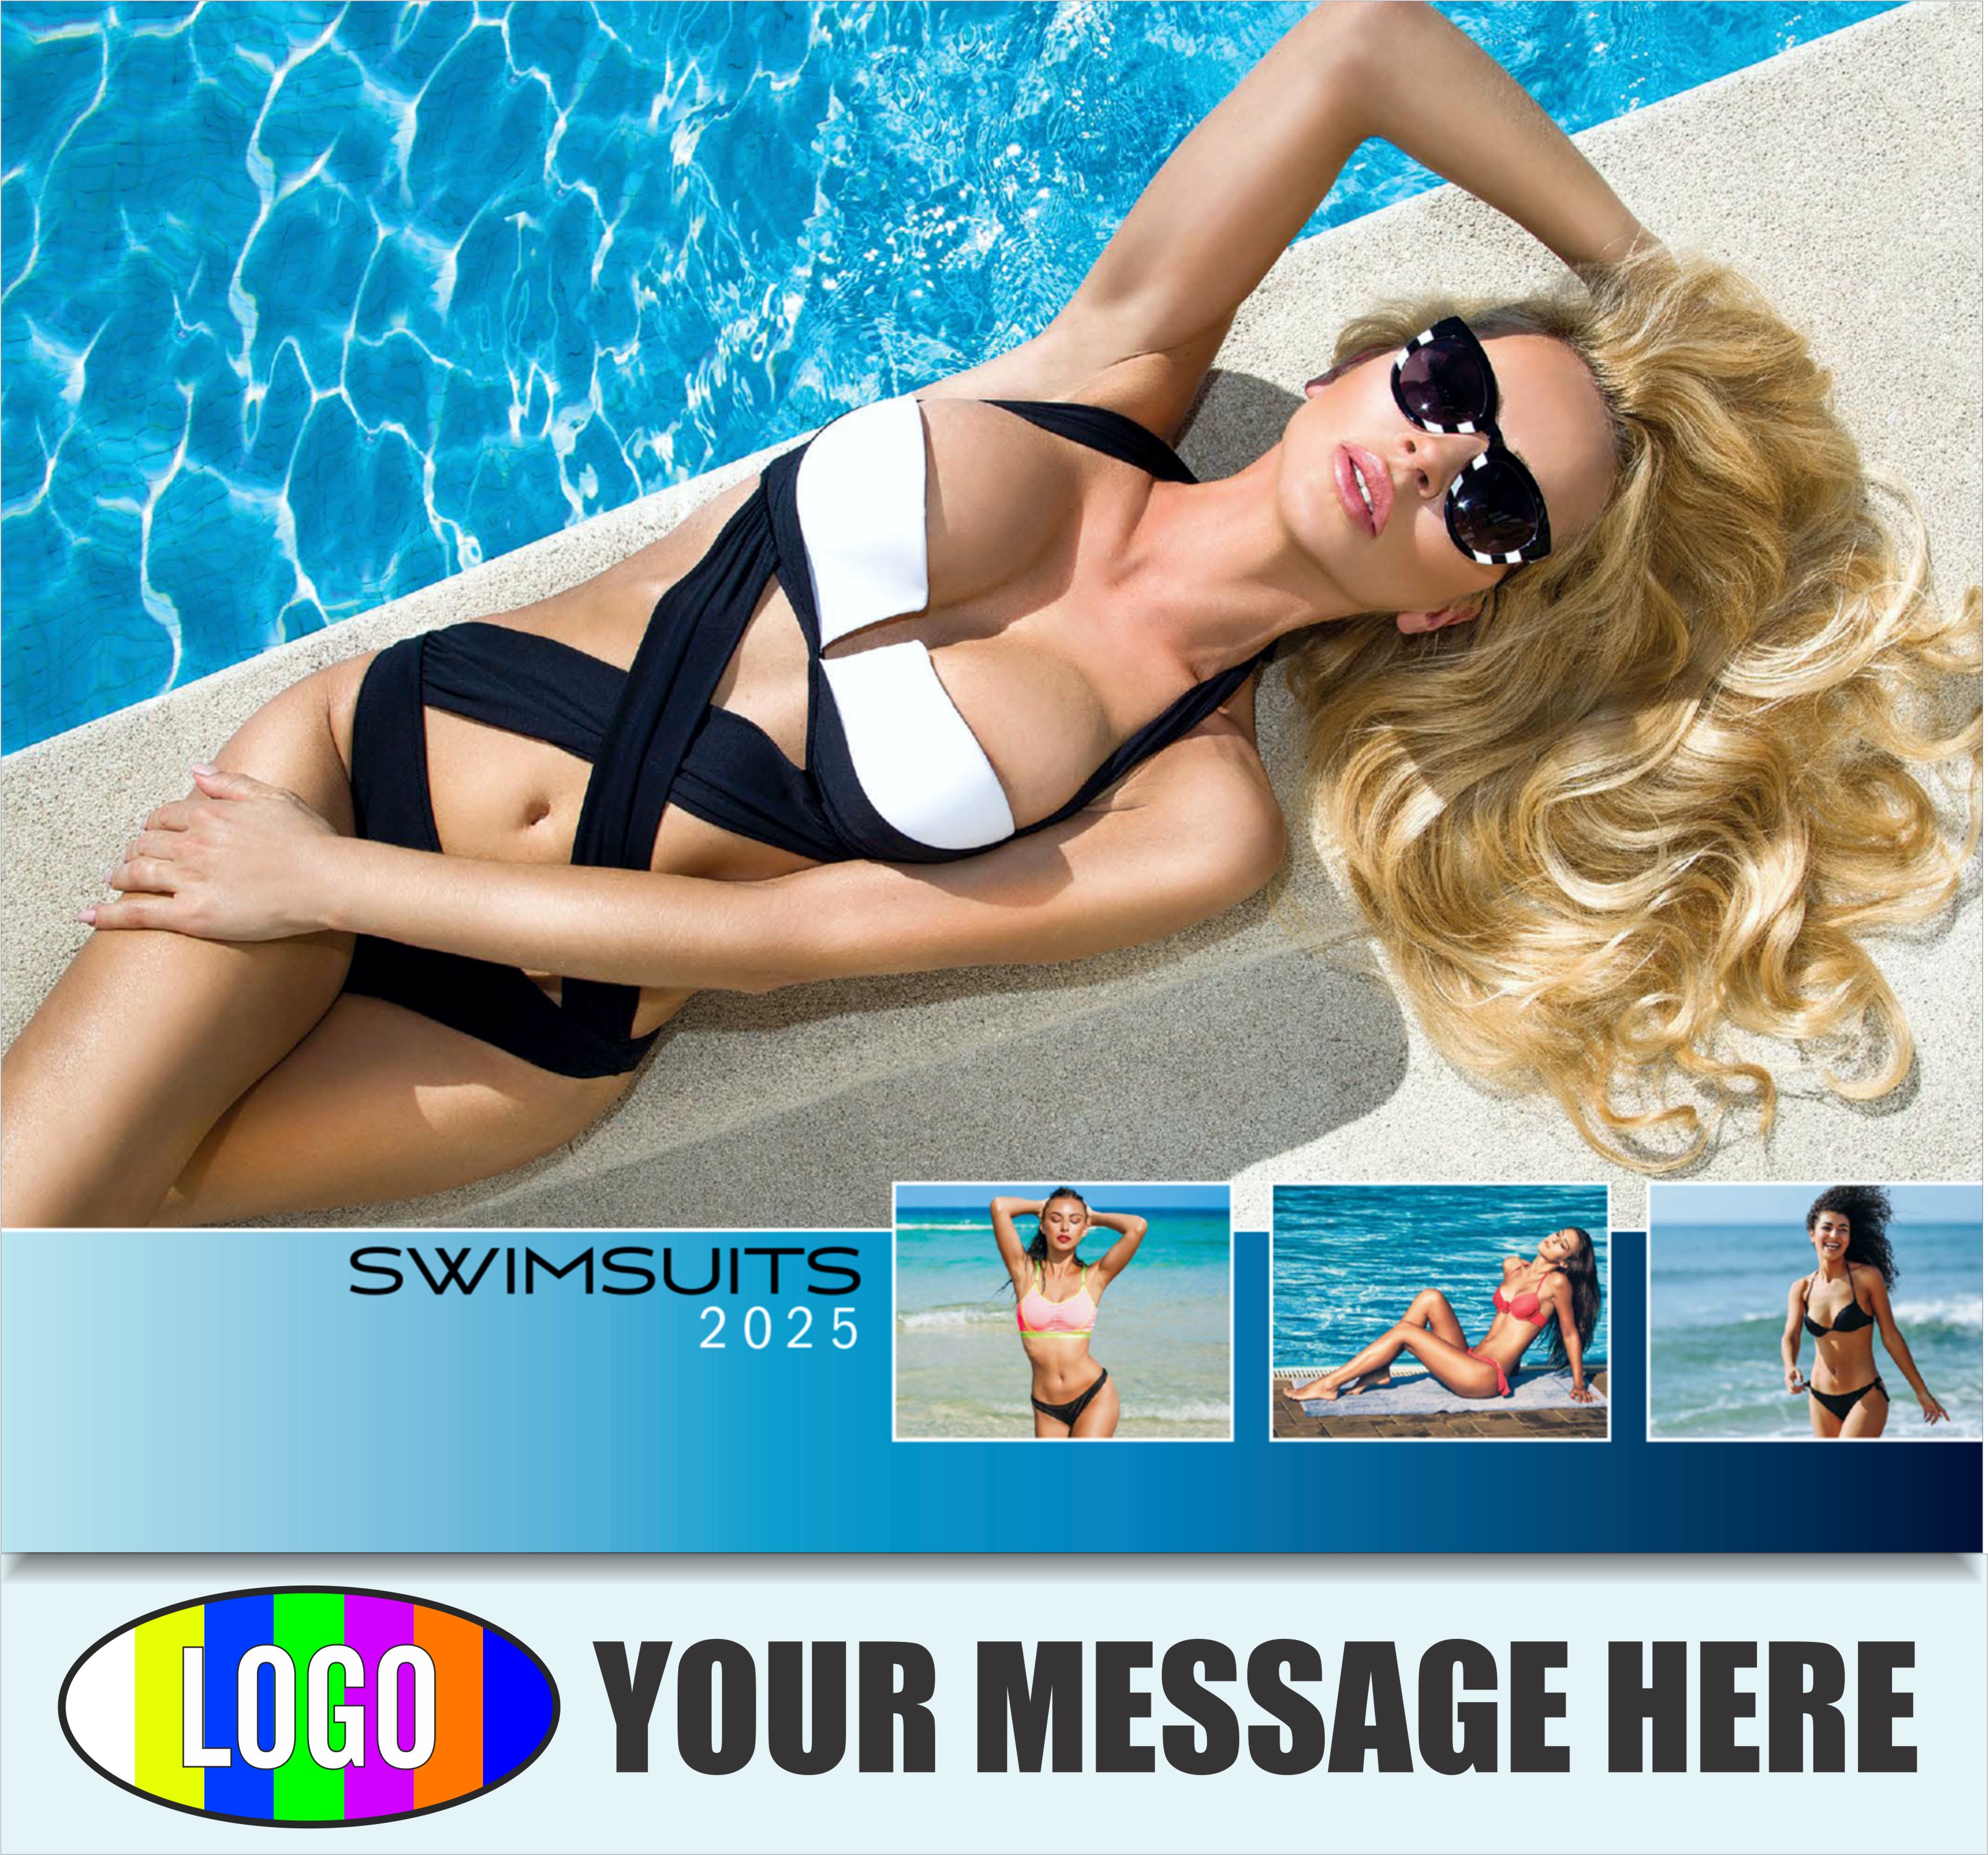 Swimsuits 2025 Business Promotional Wall Calendar - cover